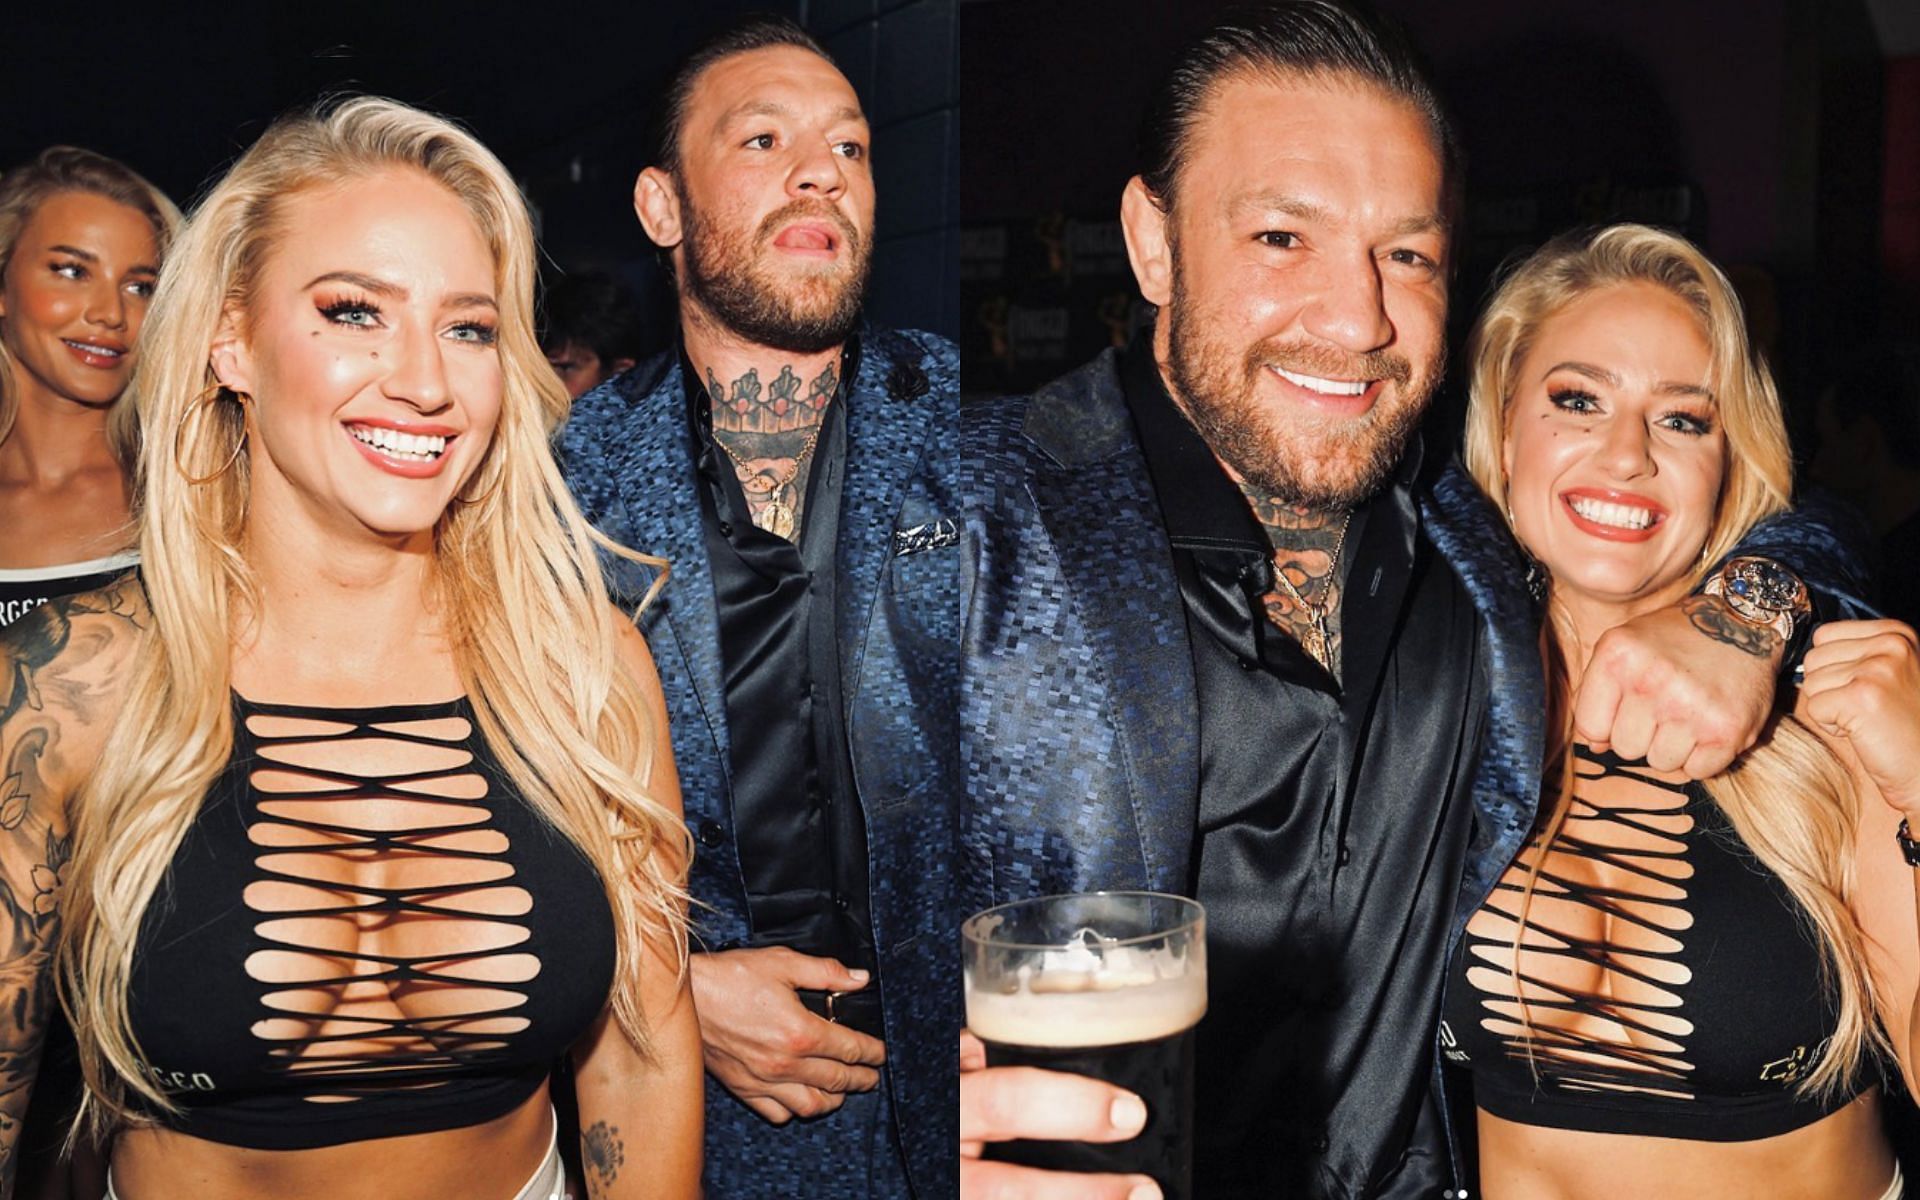 Ebanie Bridges defends her friend Conor McGregor (both pictured left and right) from fan